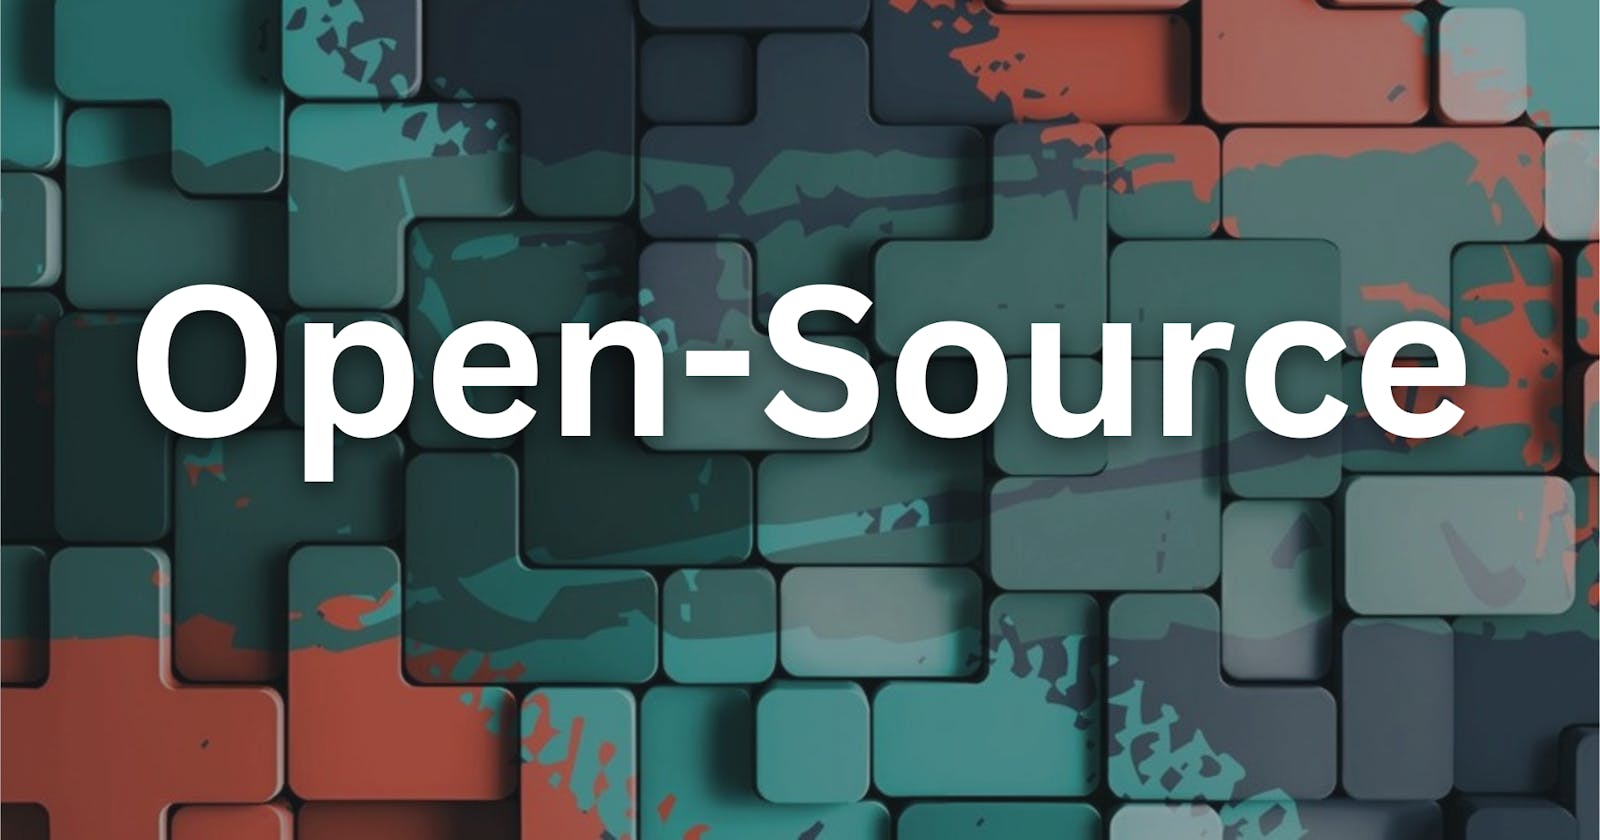 Getting Started with Open-Source